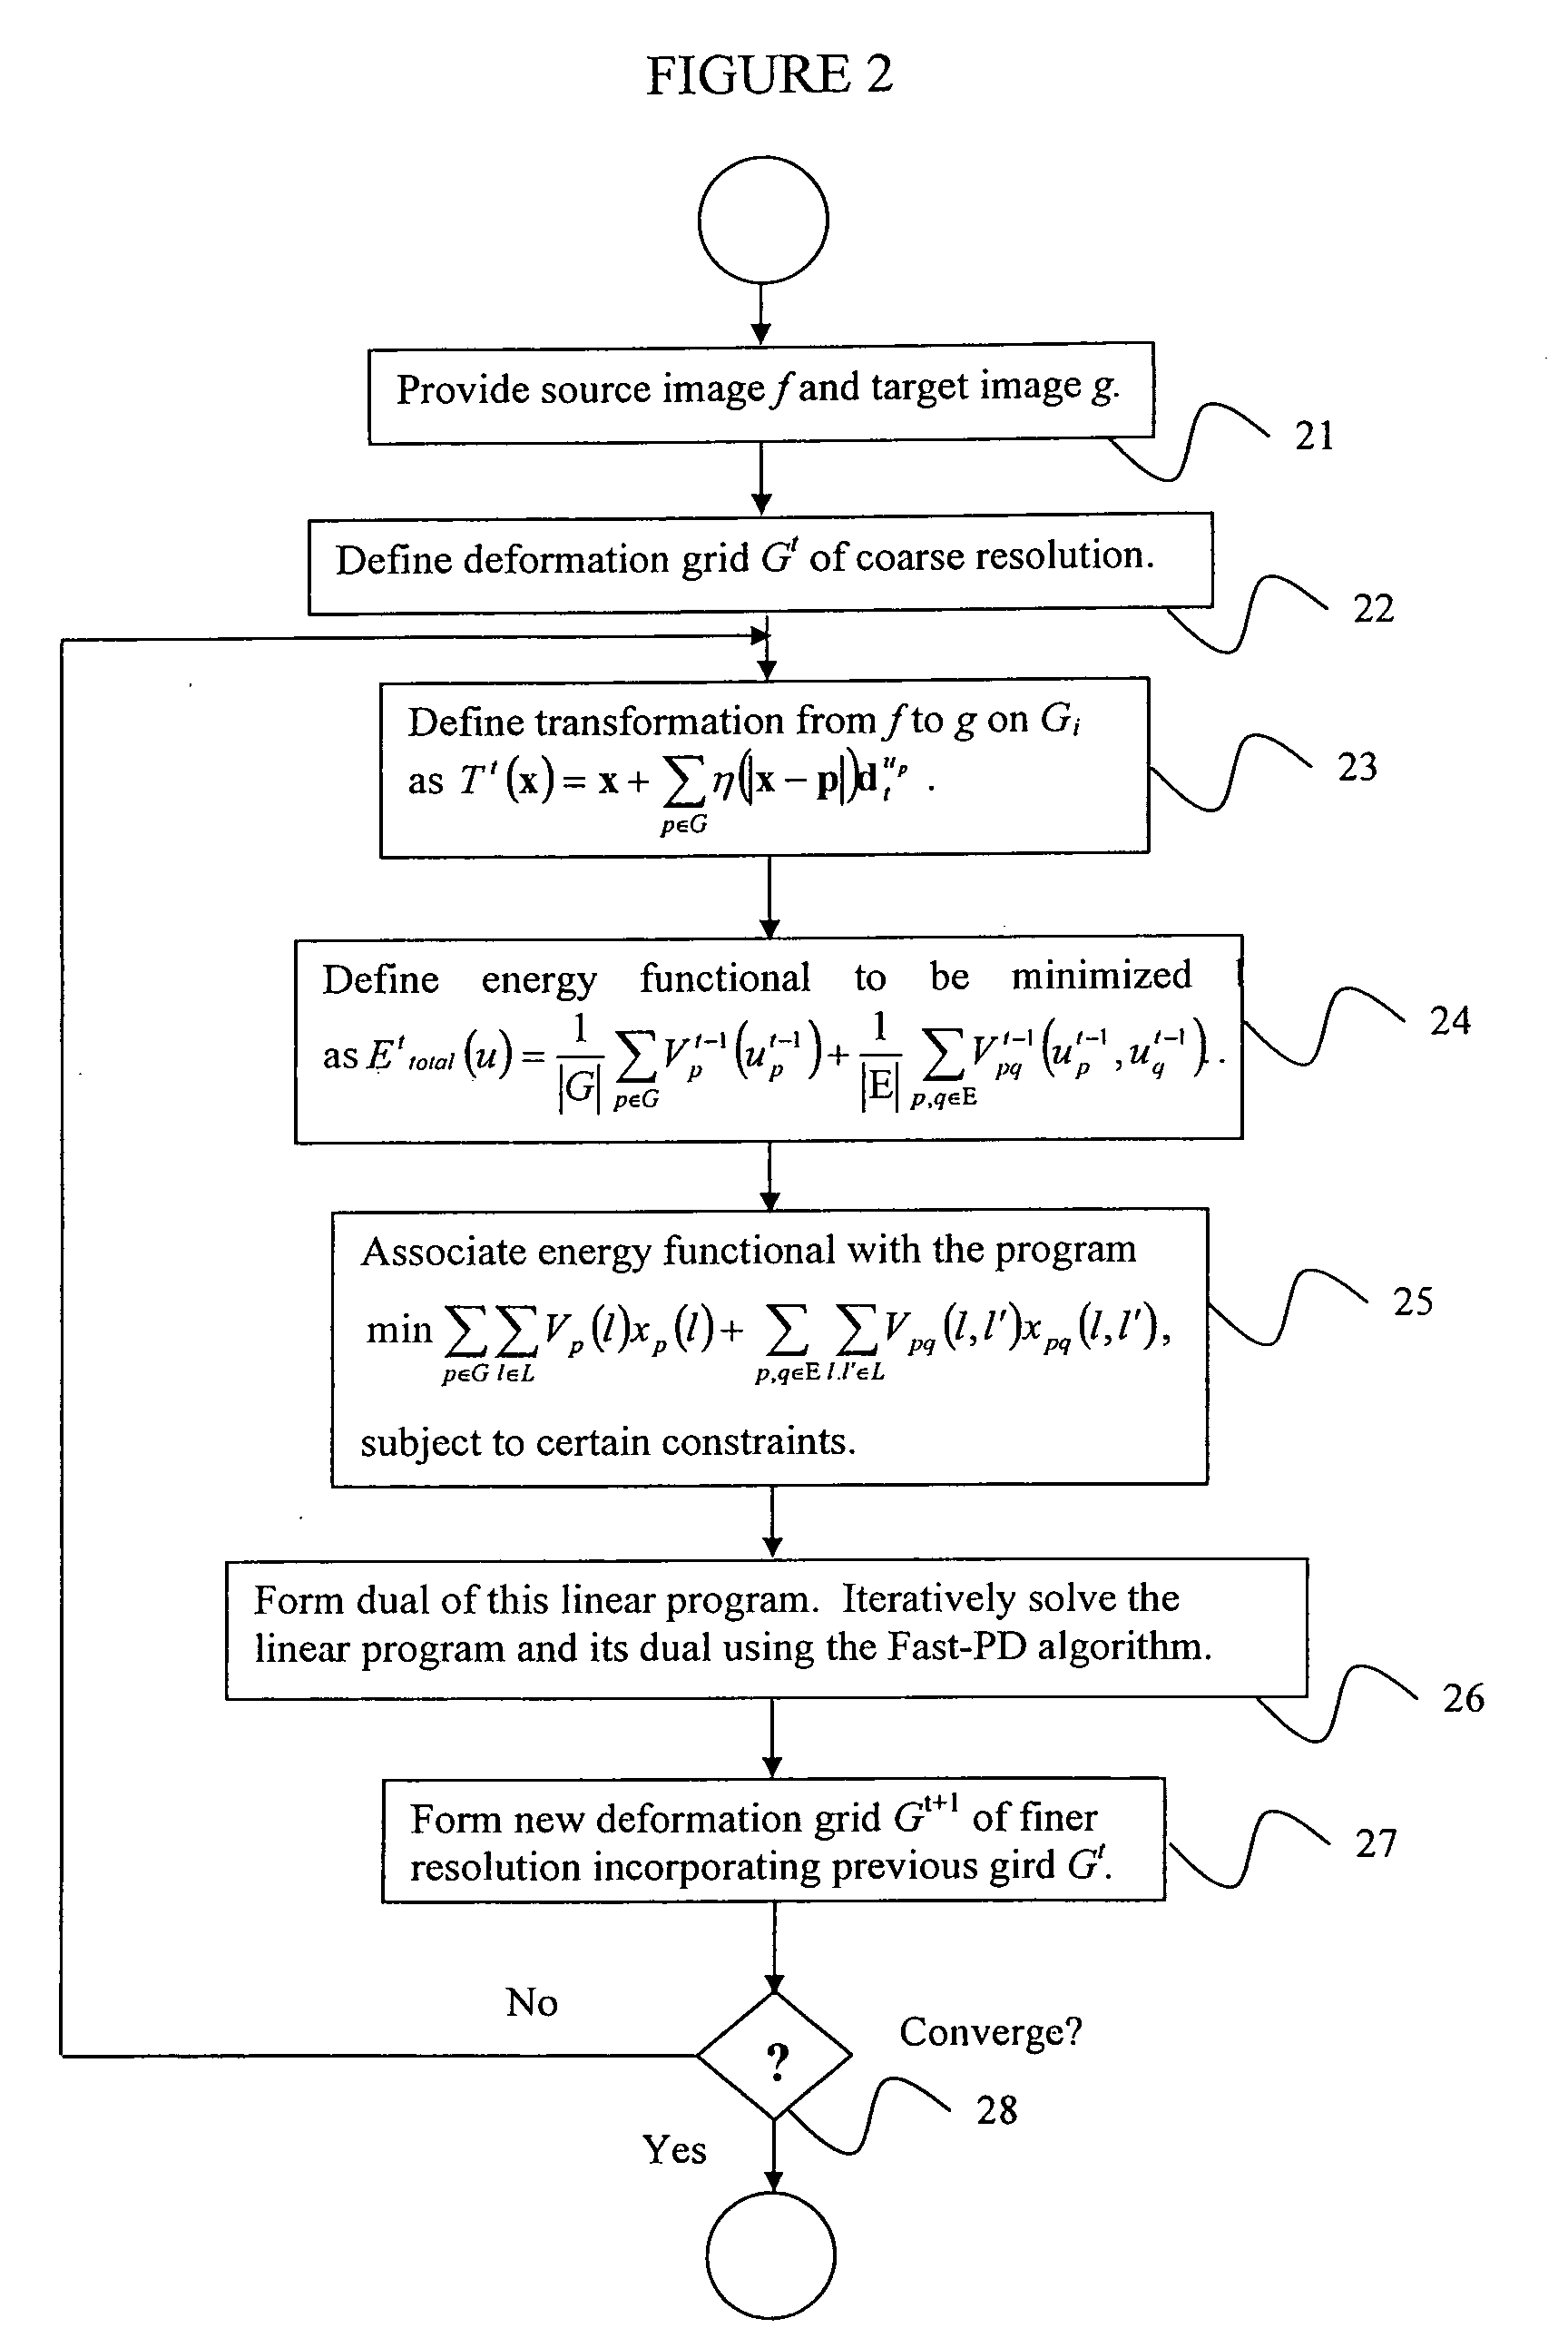 System and Method for Dense Image Registration Using Markov Random Fields and Efficient Linear Programming